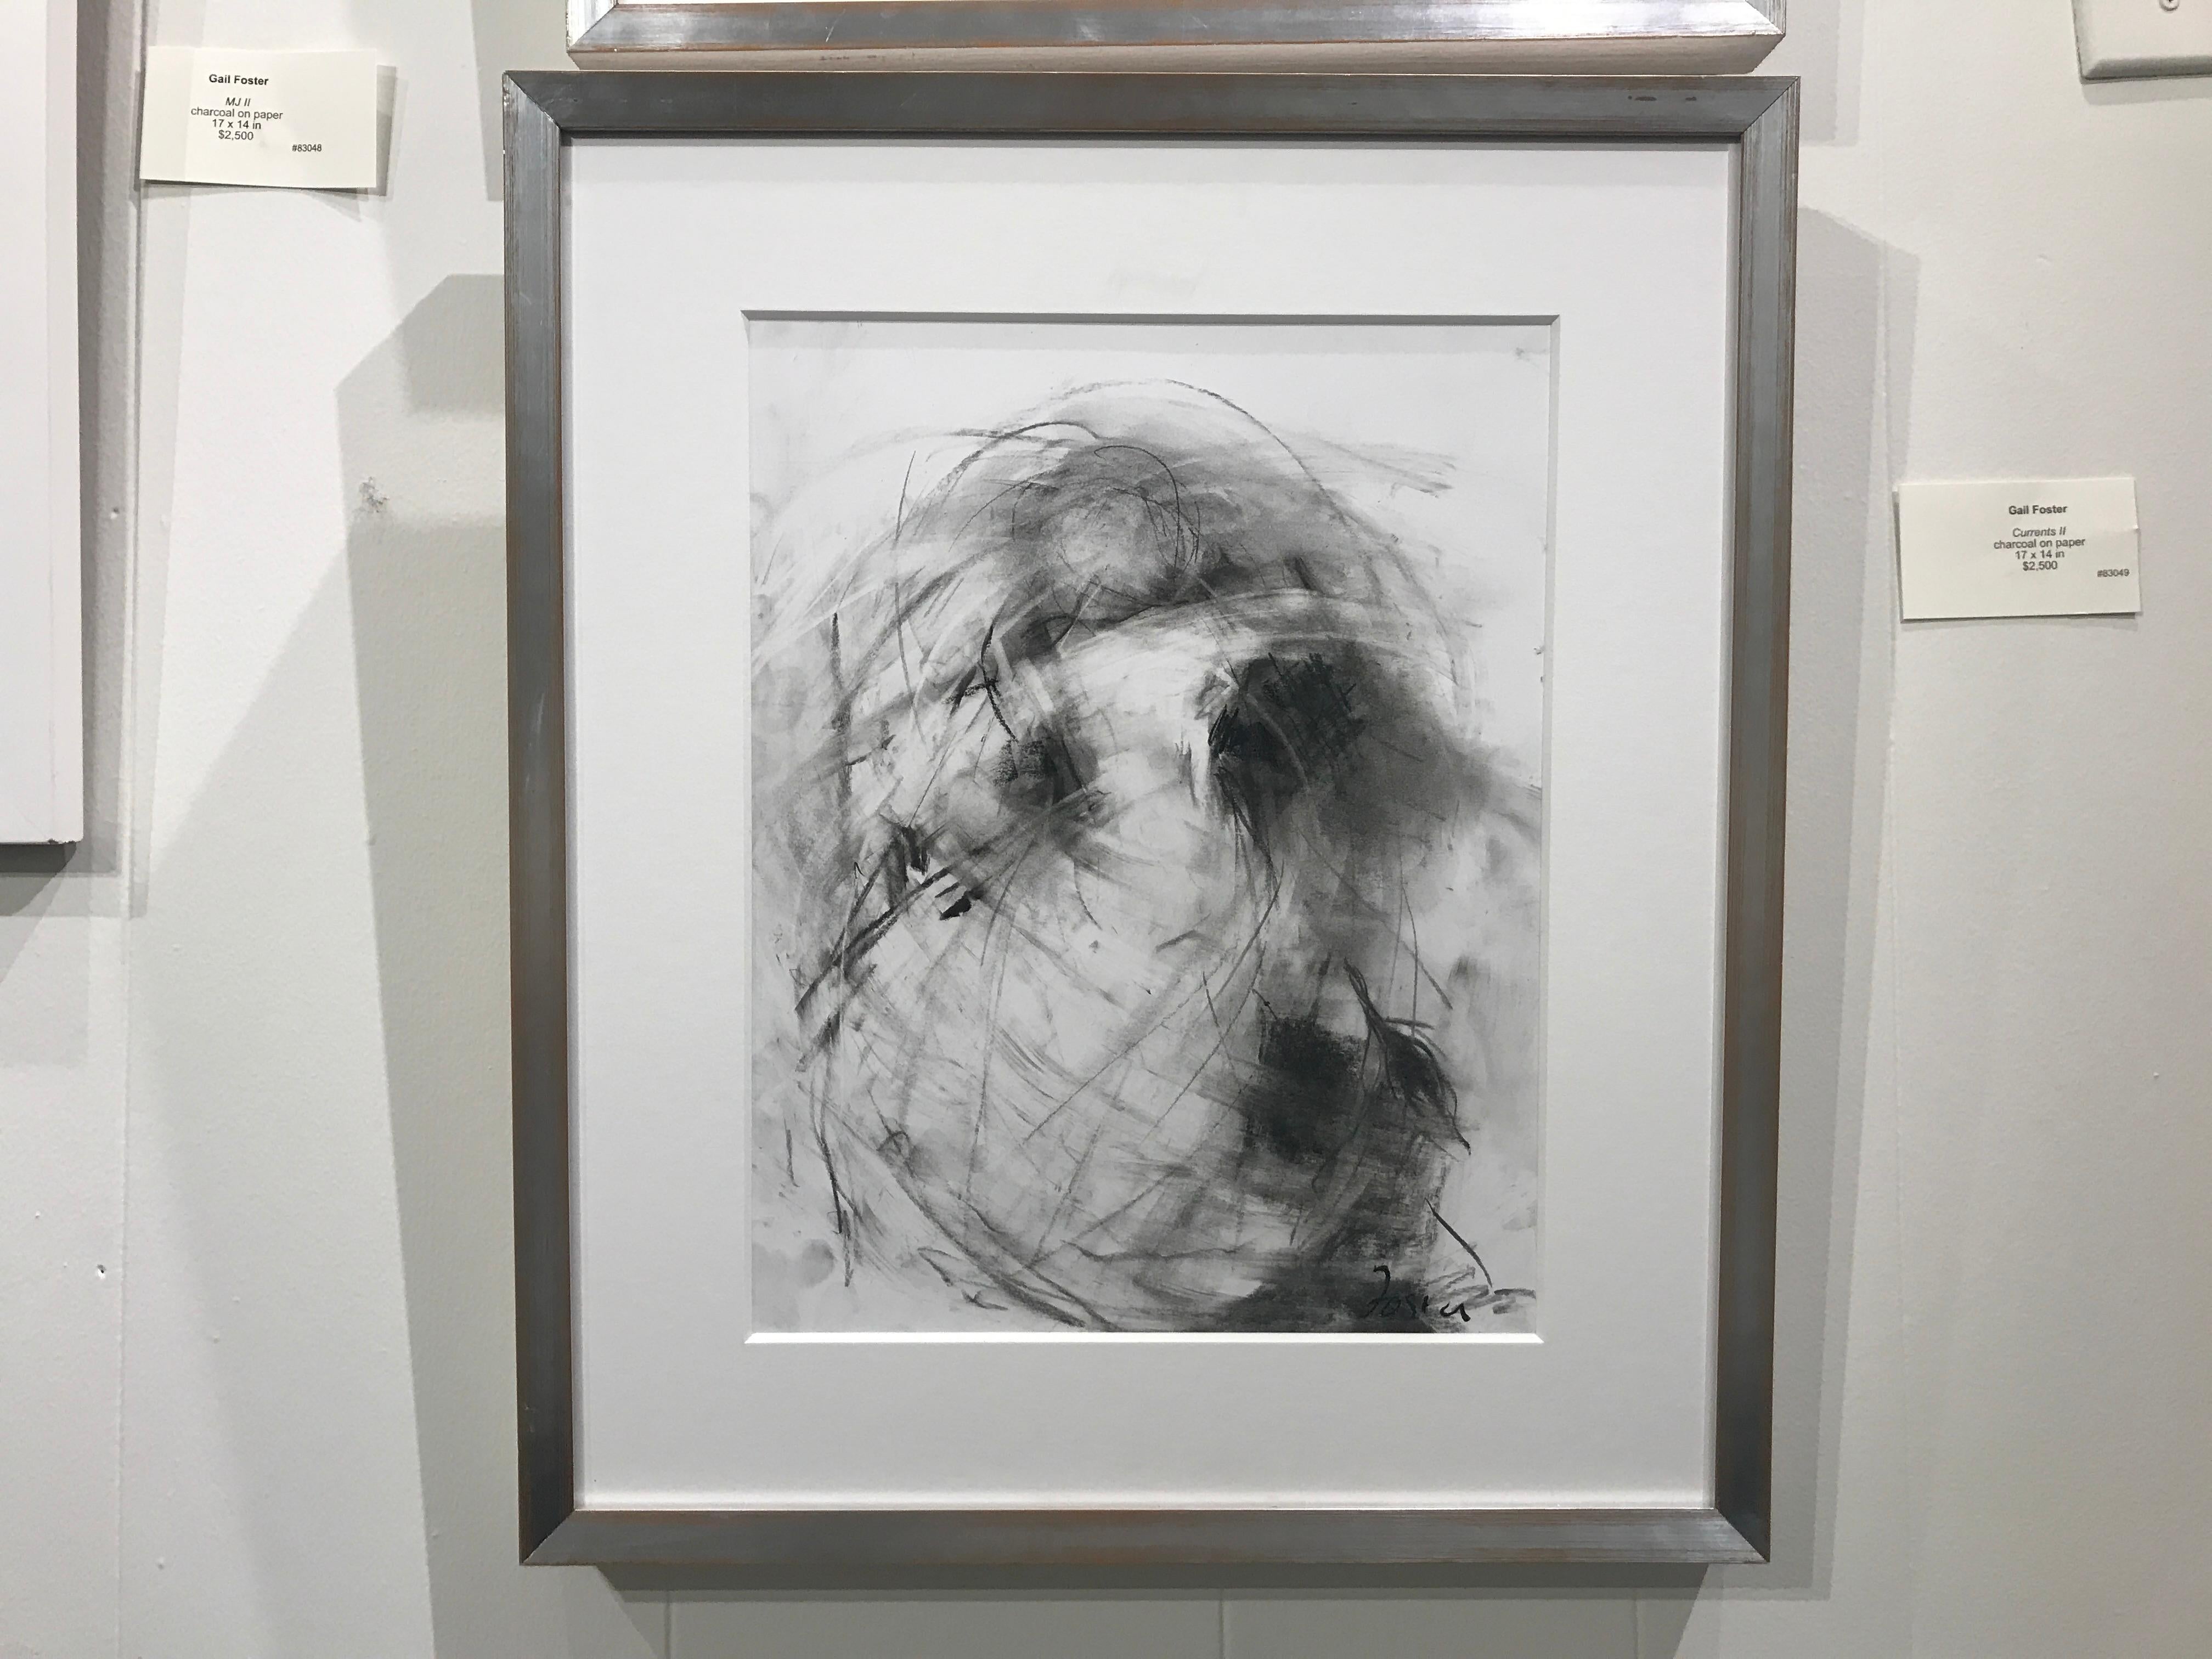 Currents II by Gail Foster 2018 Petite Framed Charcoal on Paper Figurative 1